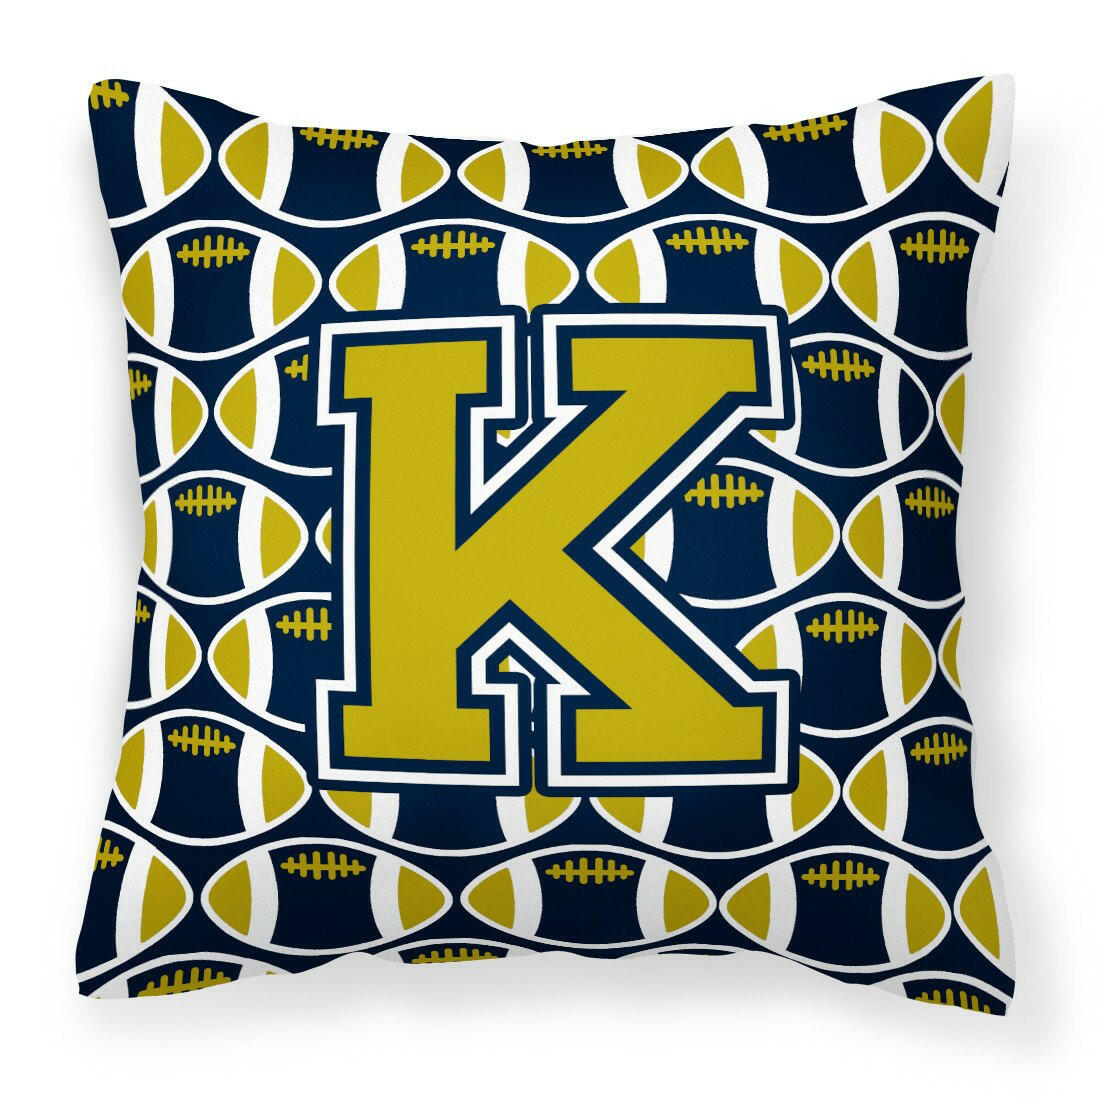 Letter K Football Blue and Gold Fabric Decorative Pillow CJ1074-KPW1414 by Caroline's Treasures